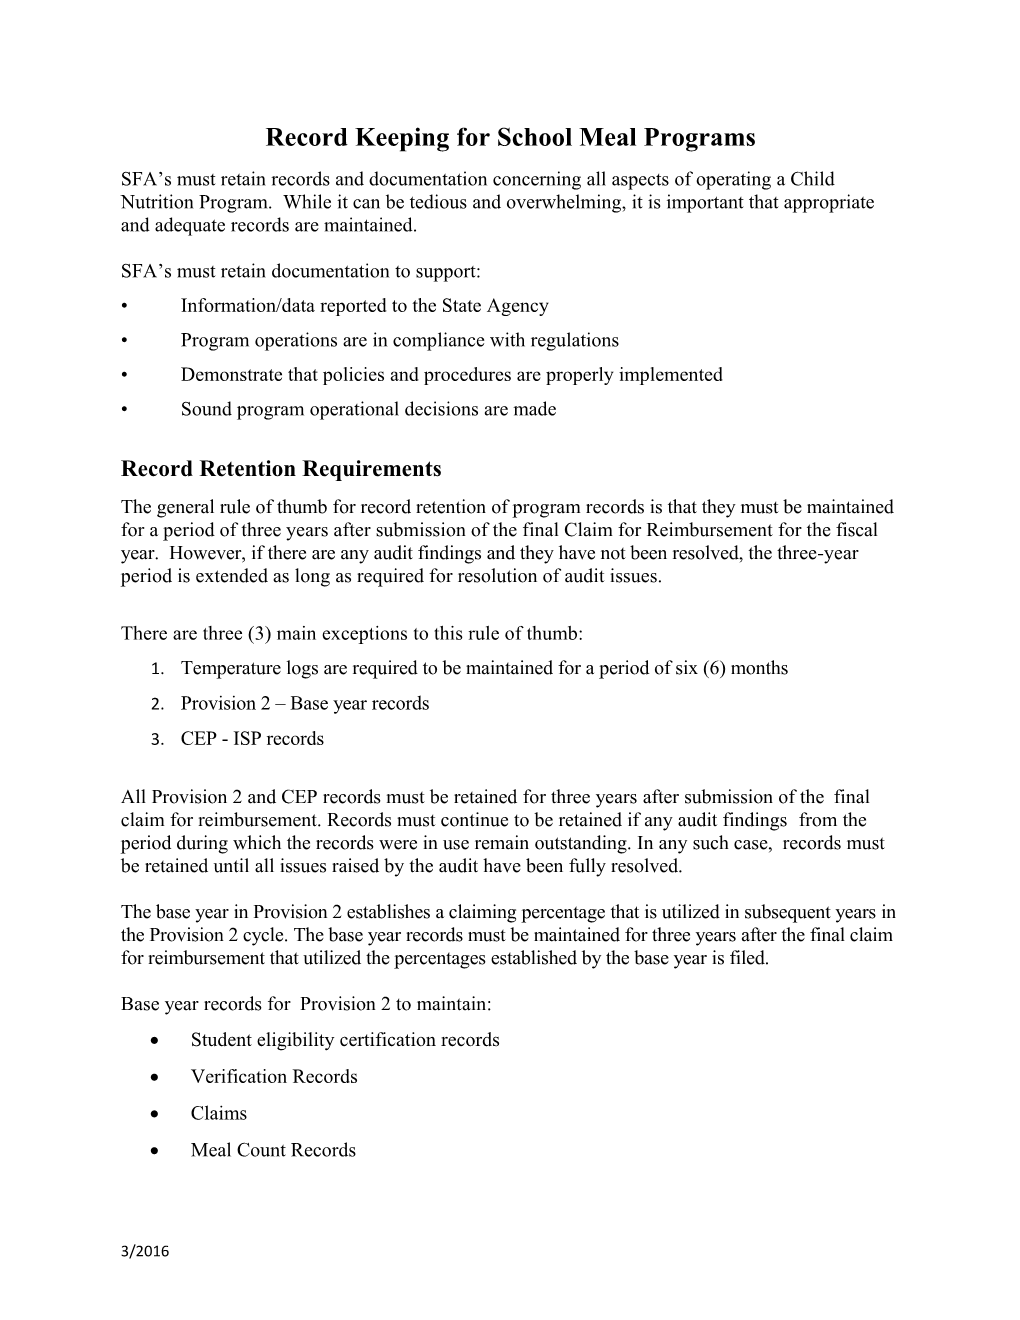 SCN Record Keeping Requirements 2016